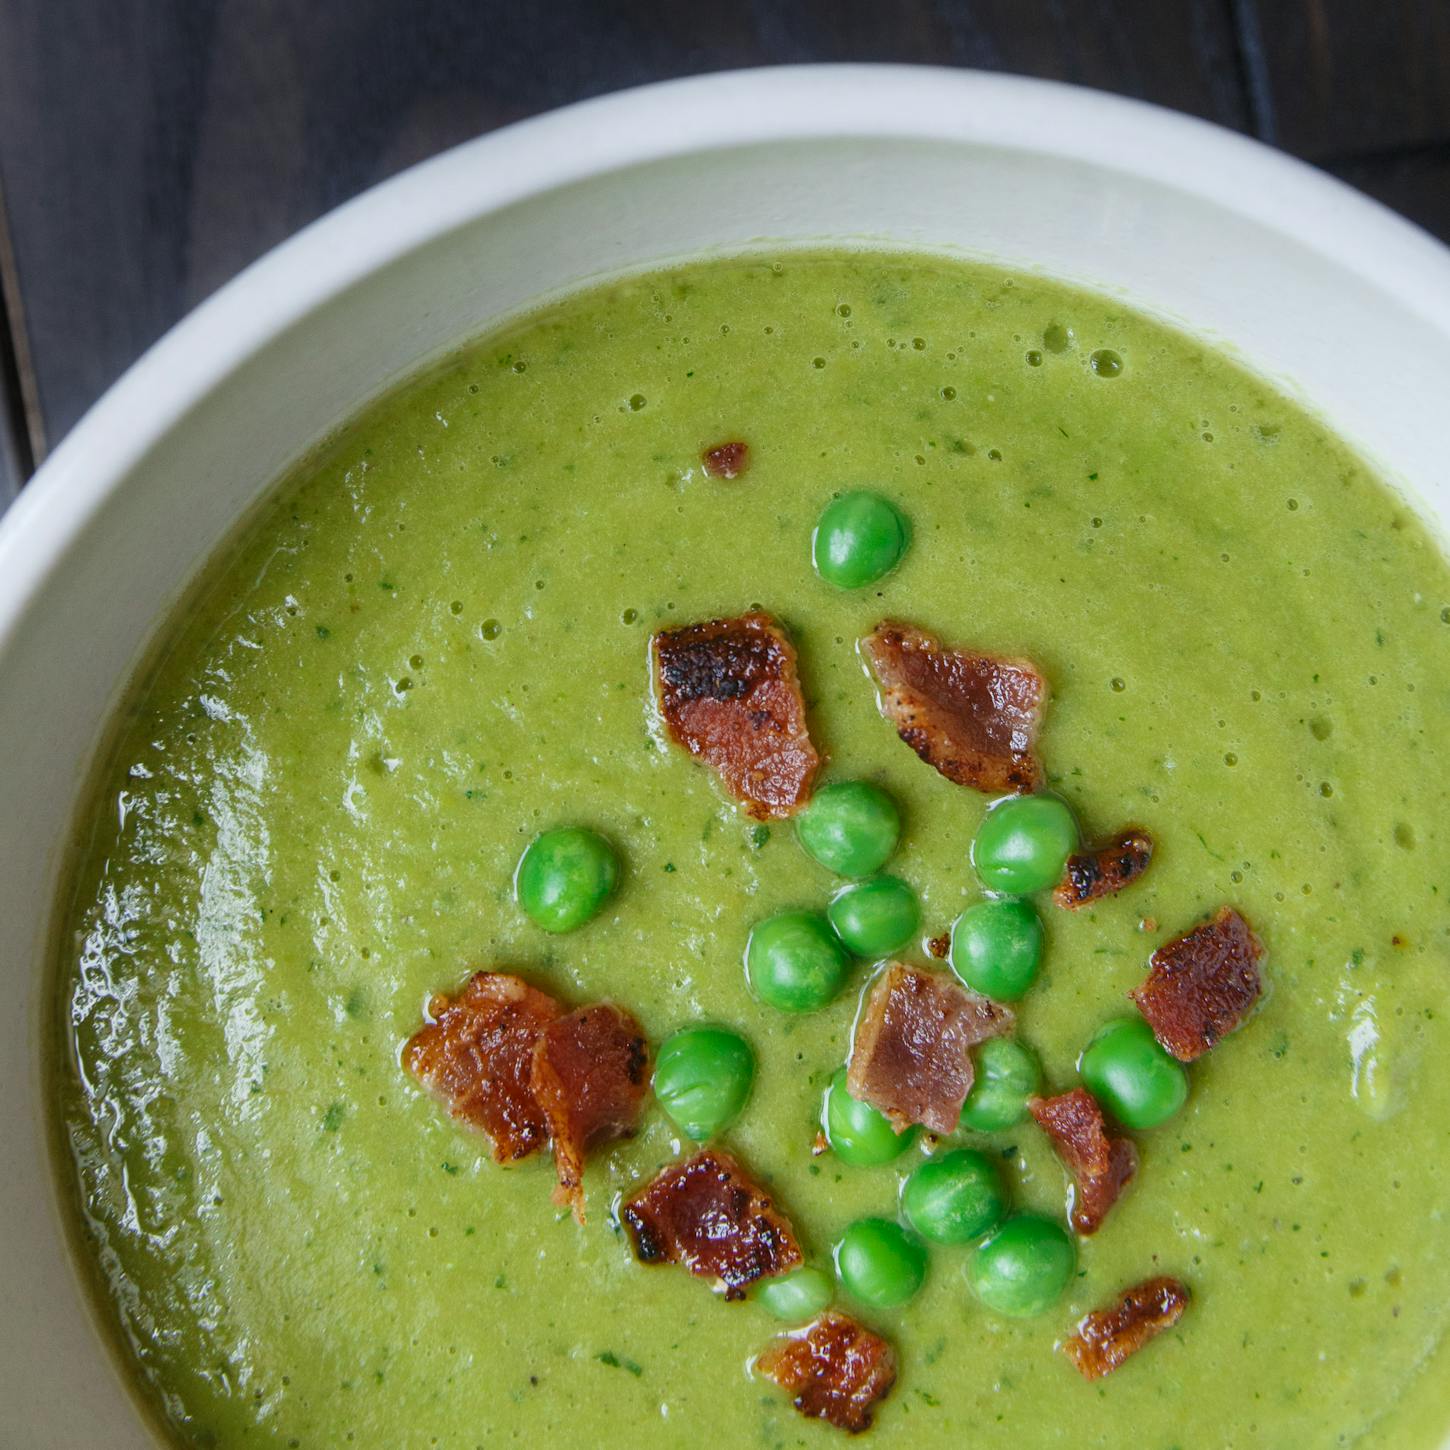 https://images.theyellowtable.com/best-spring-split-pea-soup-bacon-croutons-recipe-sq.jpg?w=1450&q=45